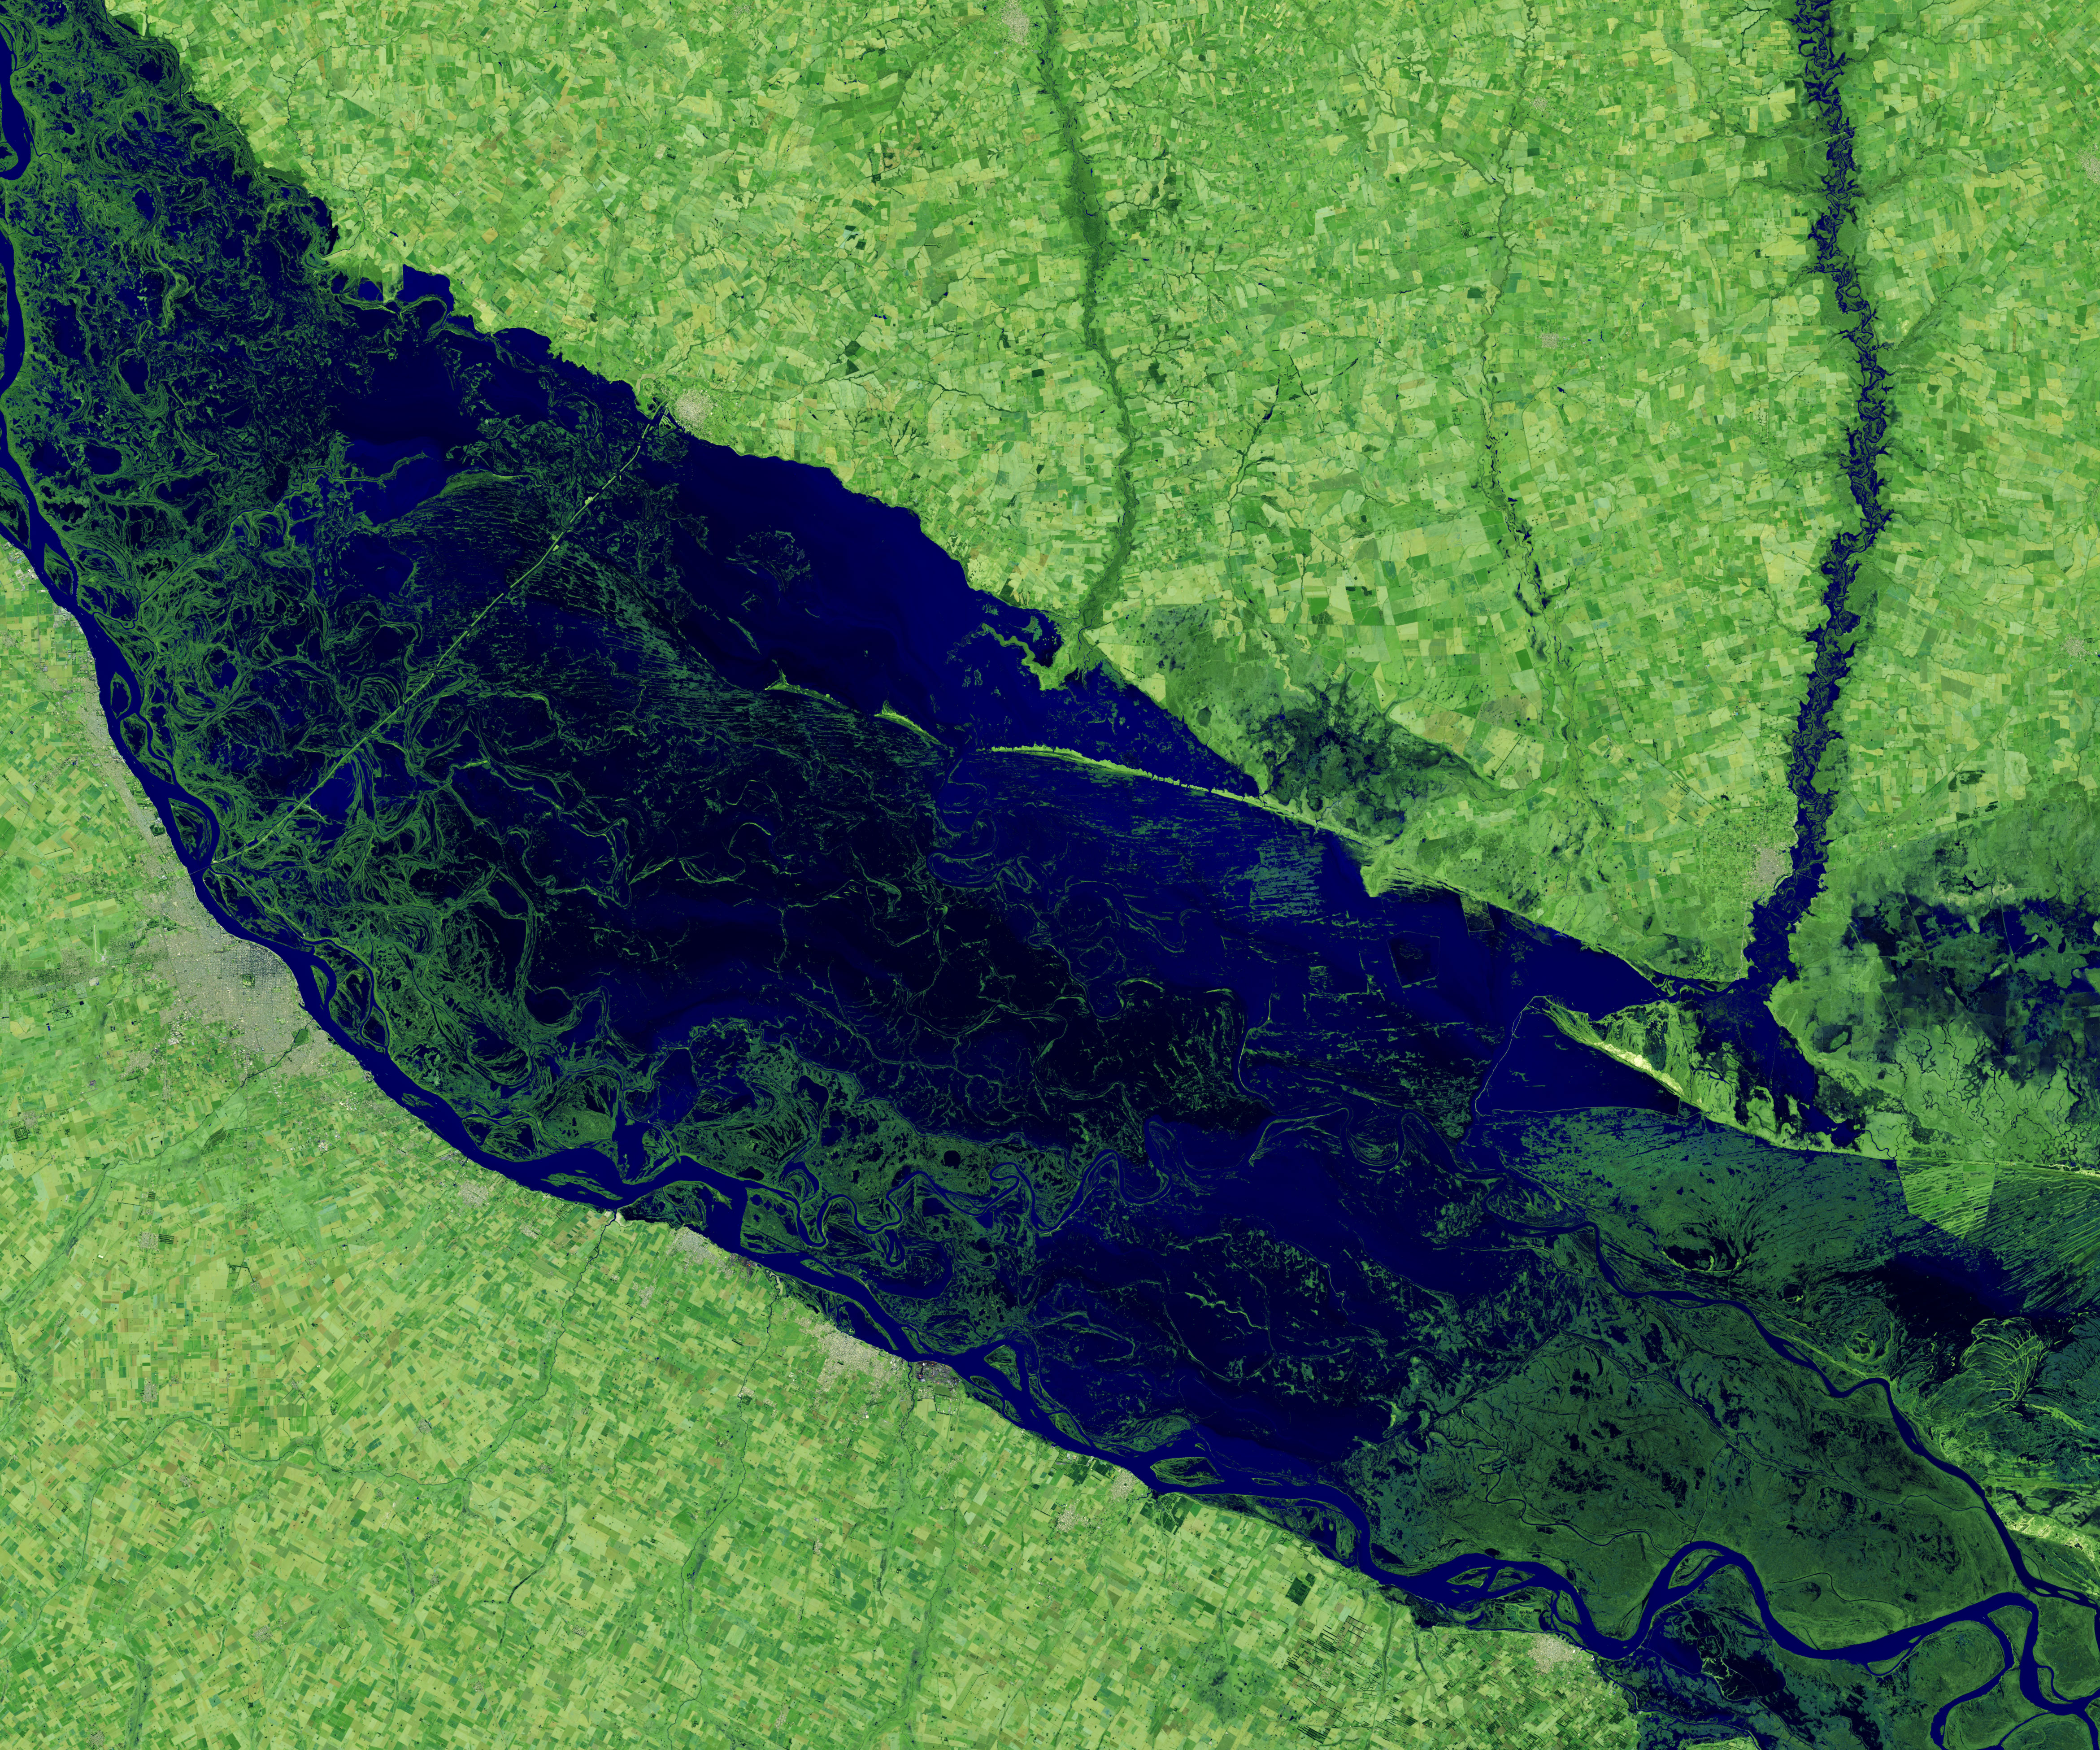 The Parched Paraná River - related image preview